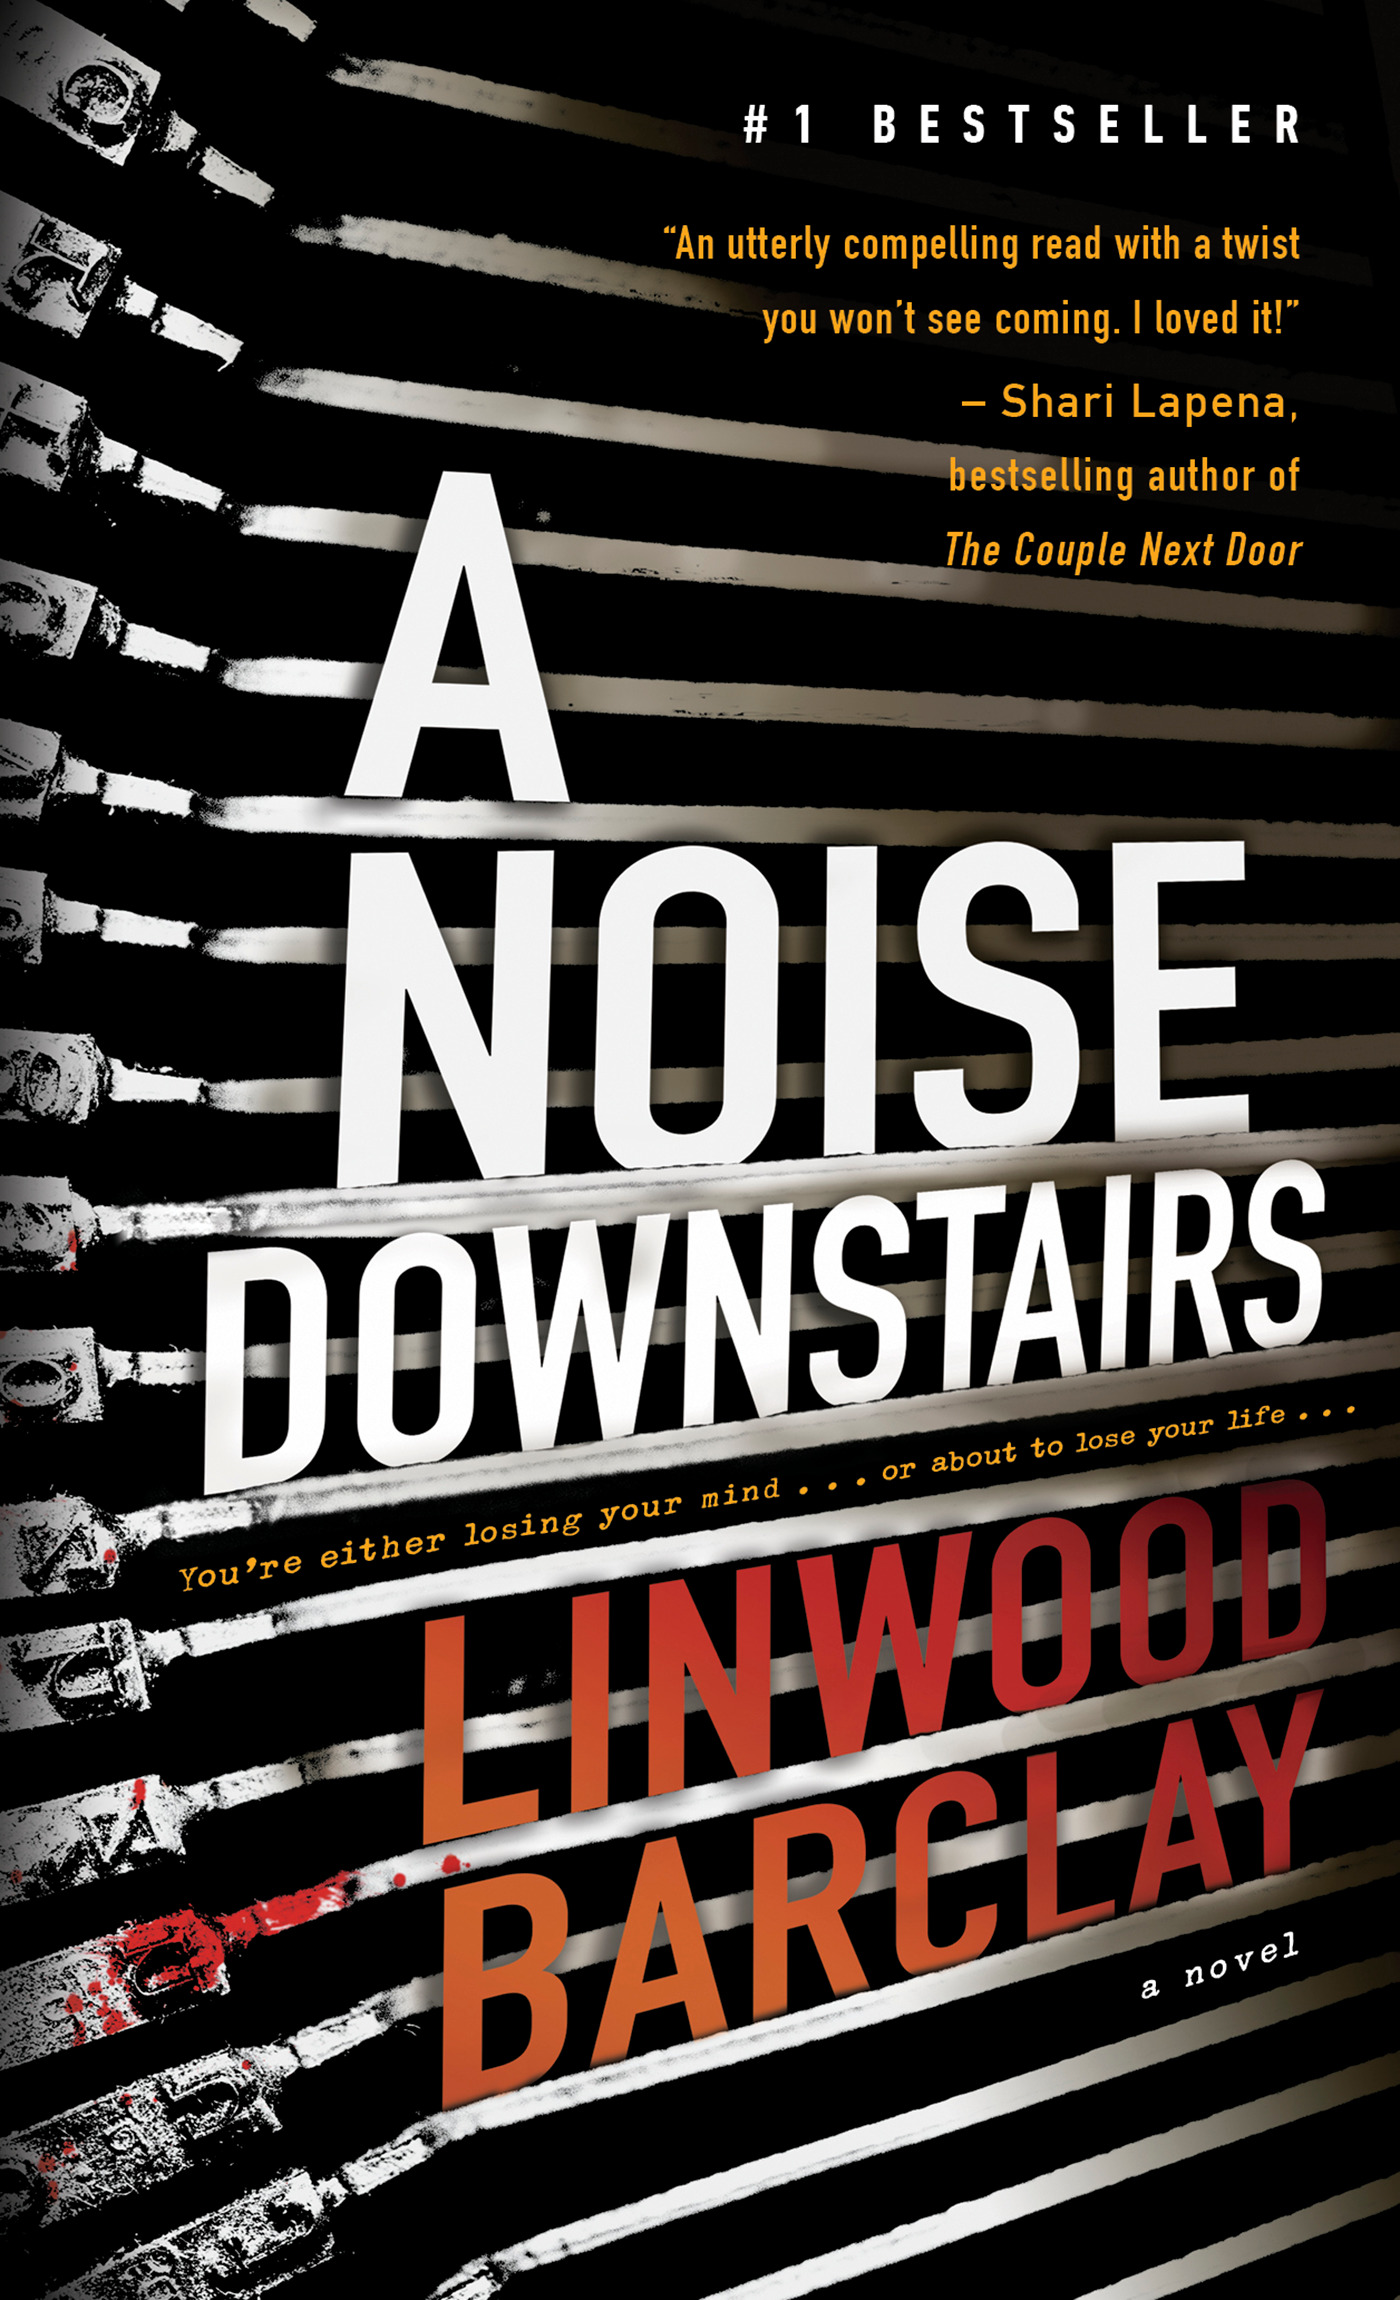 A Noise Downstairs | Barclay, Linwood